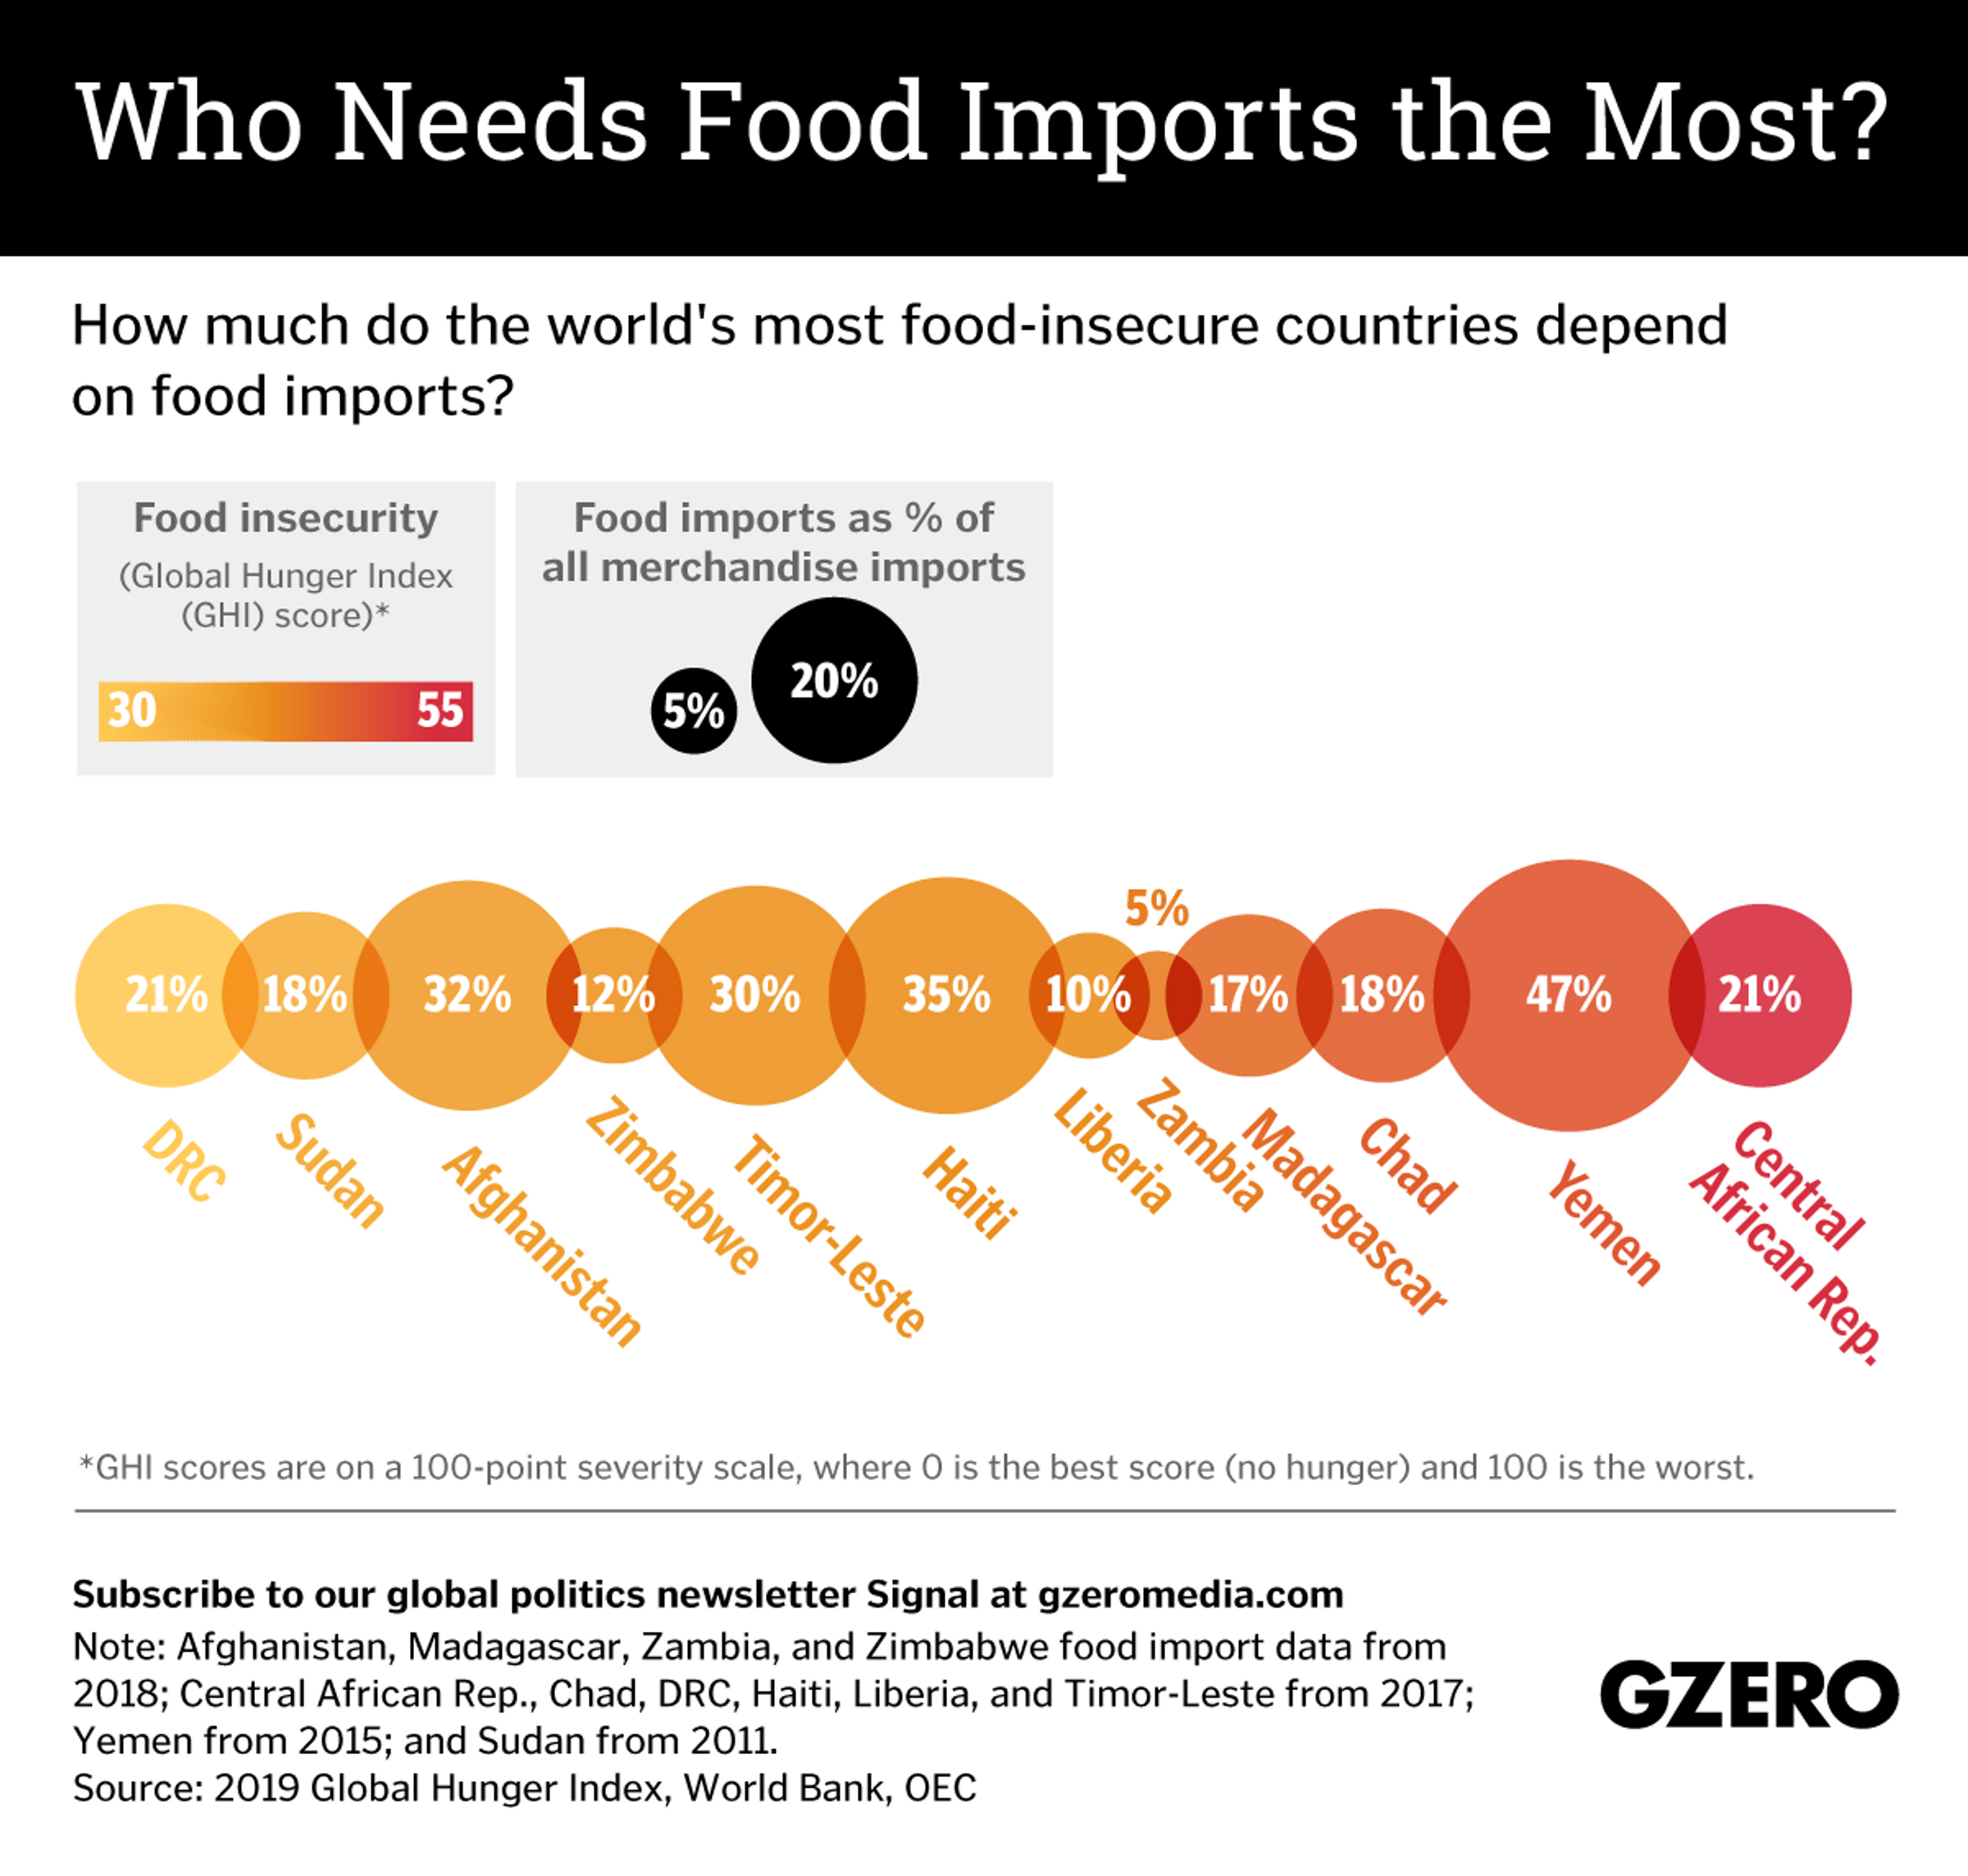 The Graphic Truth: Who needs food imports the most?